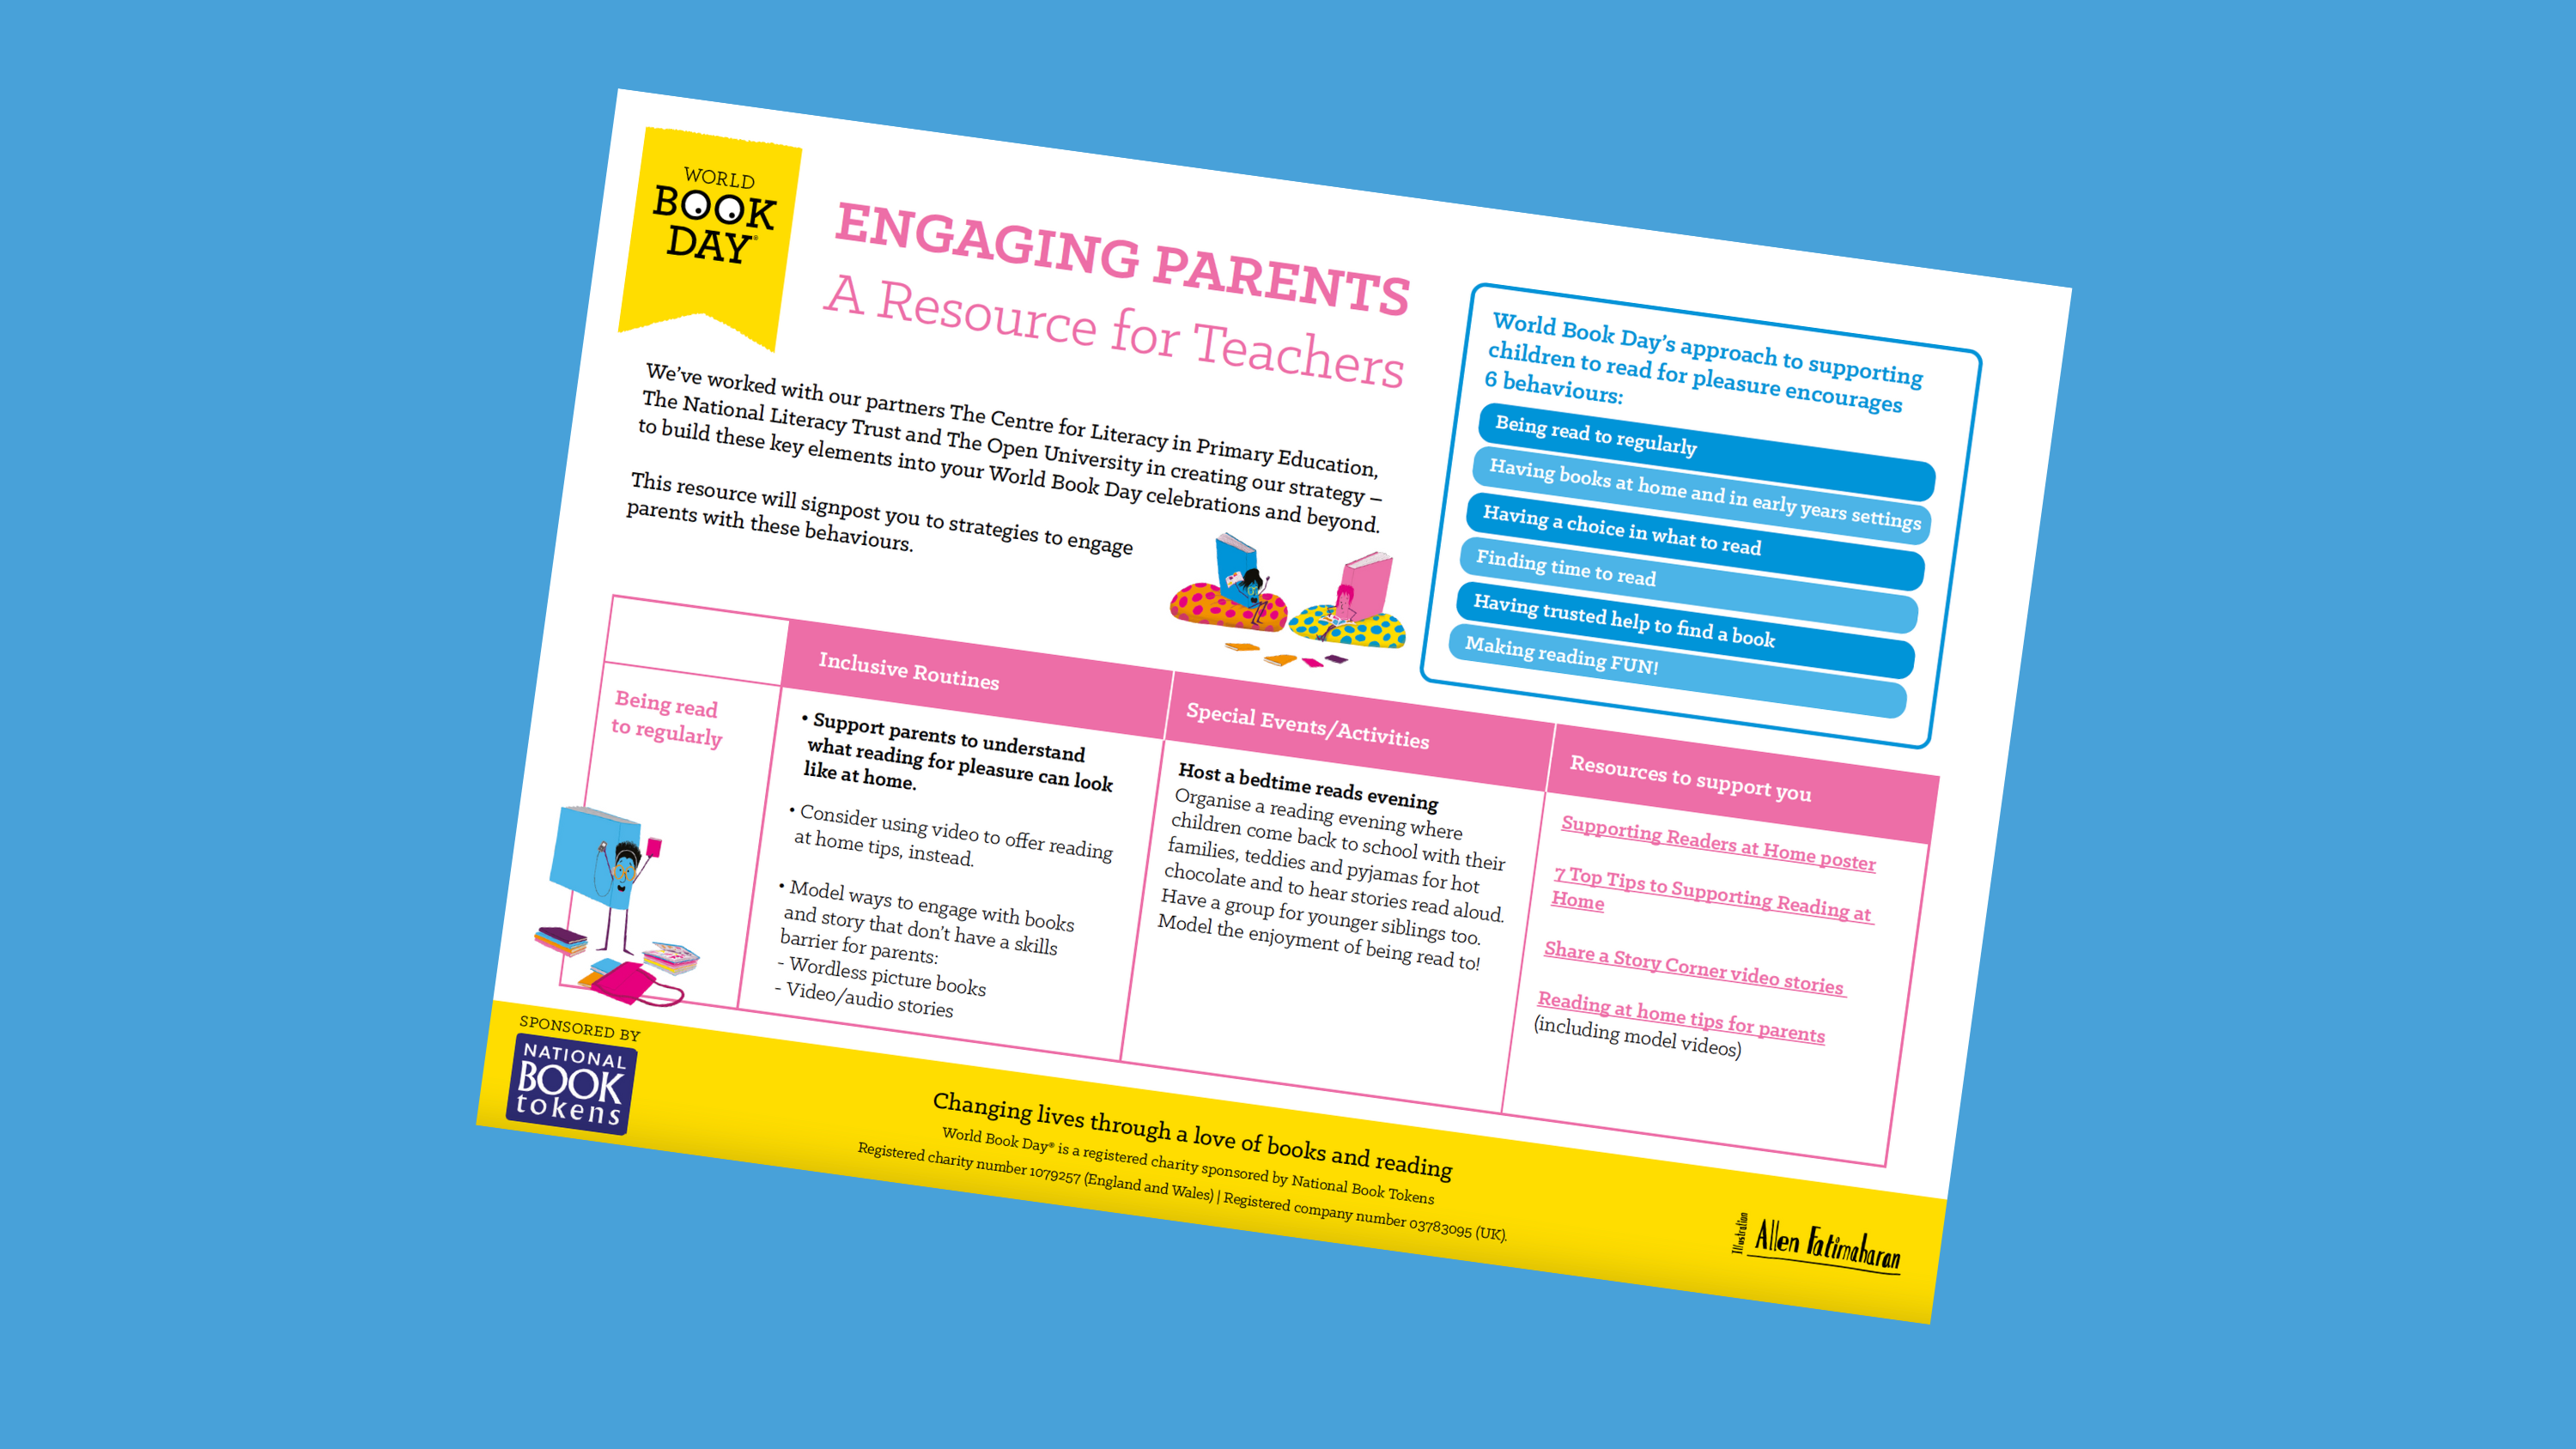 Engaging Parents – A Resource for Teachers